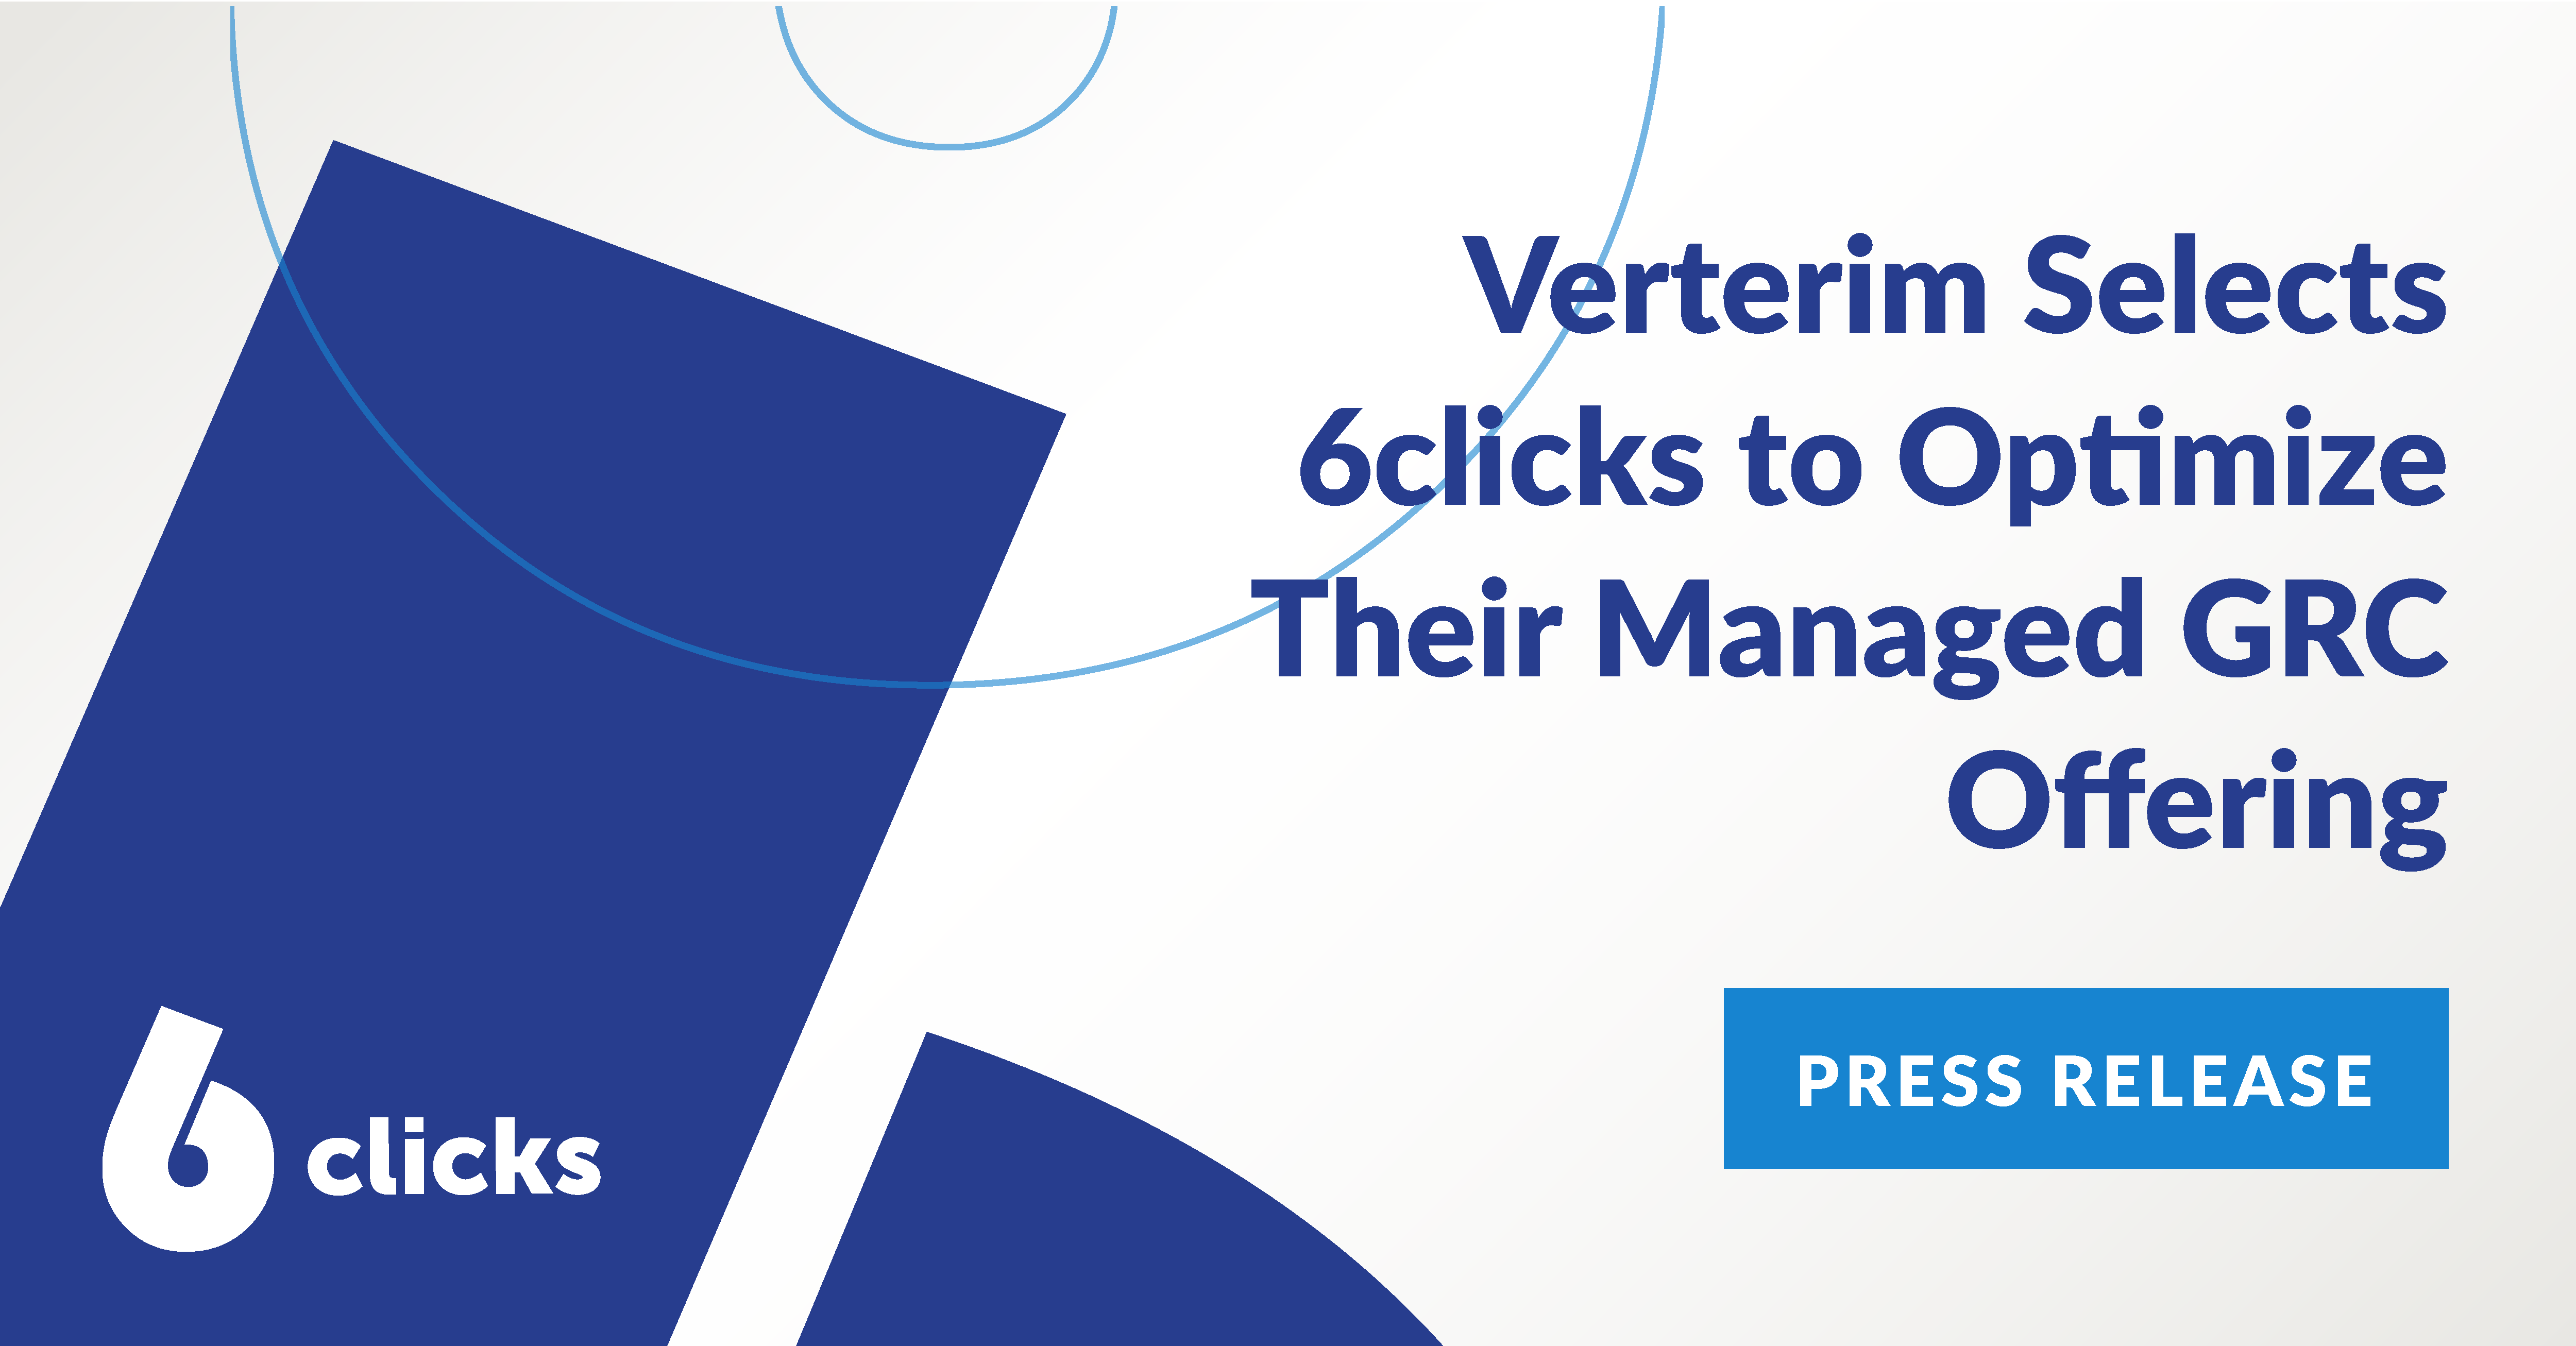 Verterim Selects 6clicks to Optimize Their Managed GRC Offering